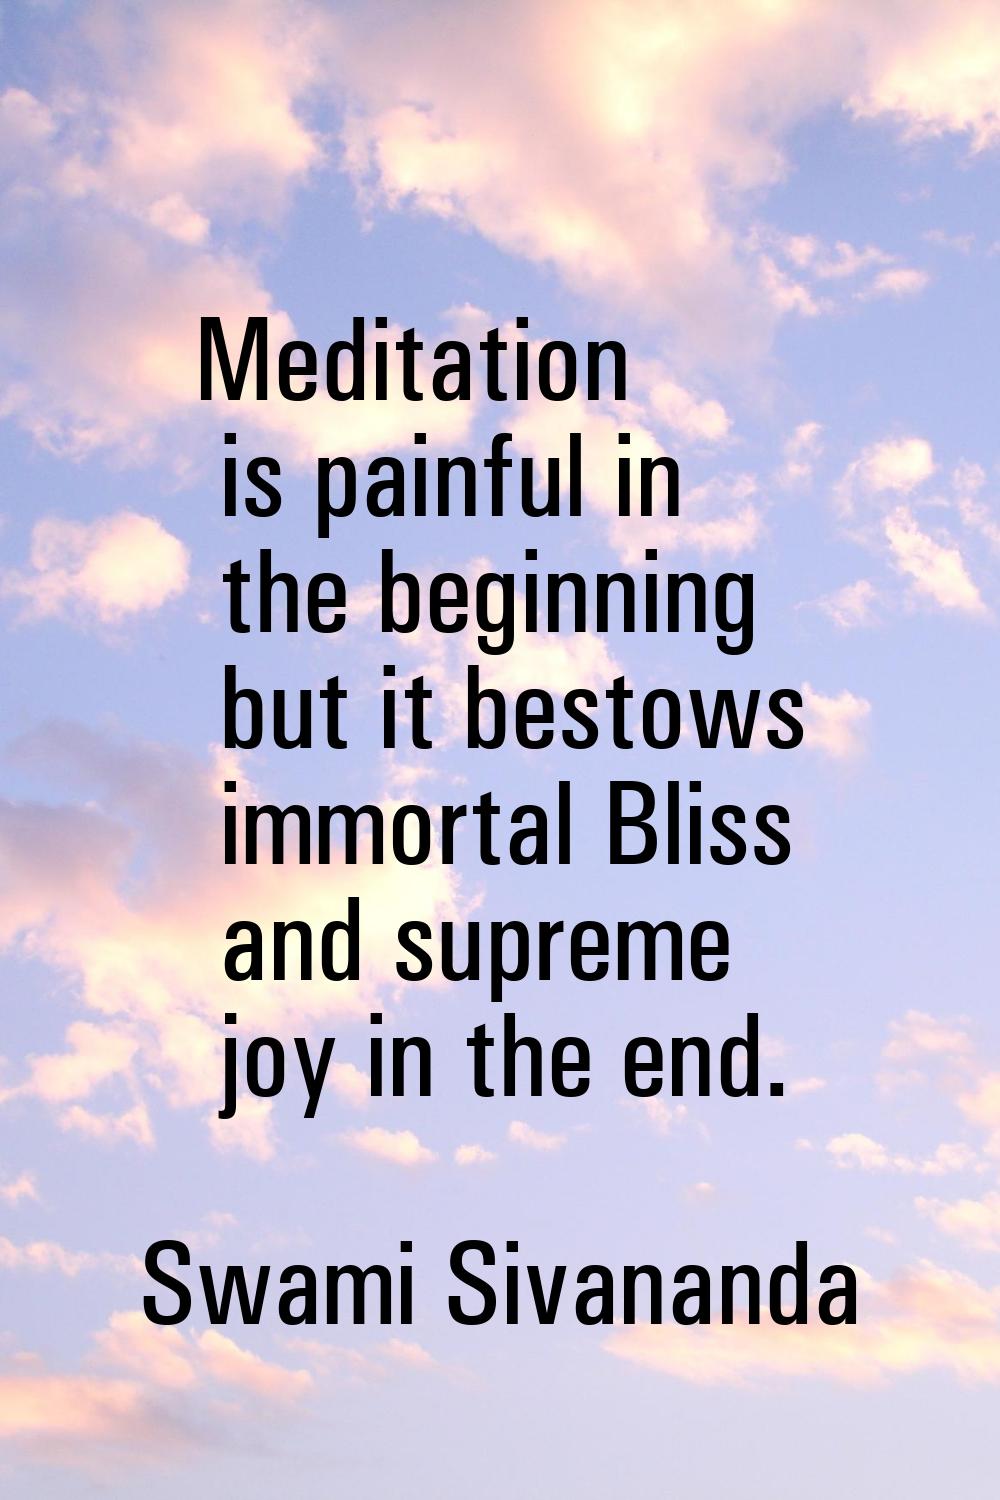 Meditation is painful in the beginning but it bestows immortal Bliss and supreme joy in the end.